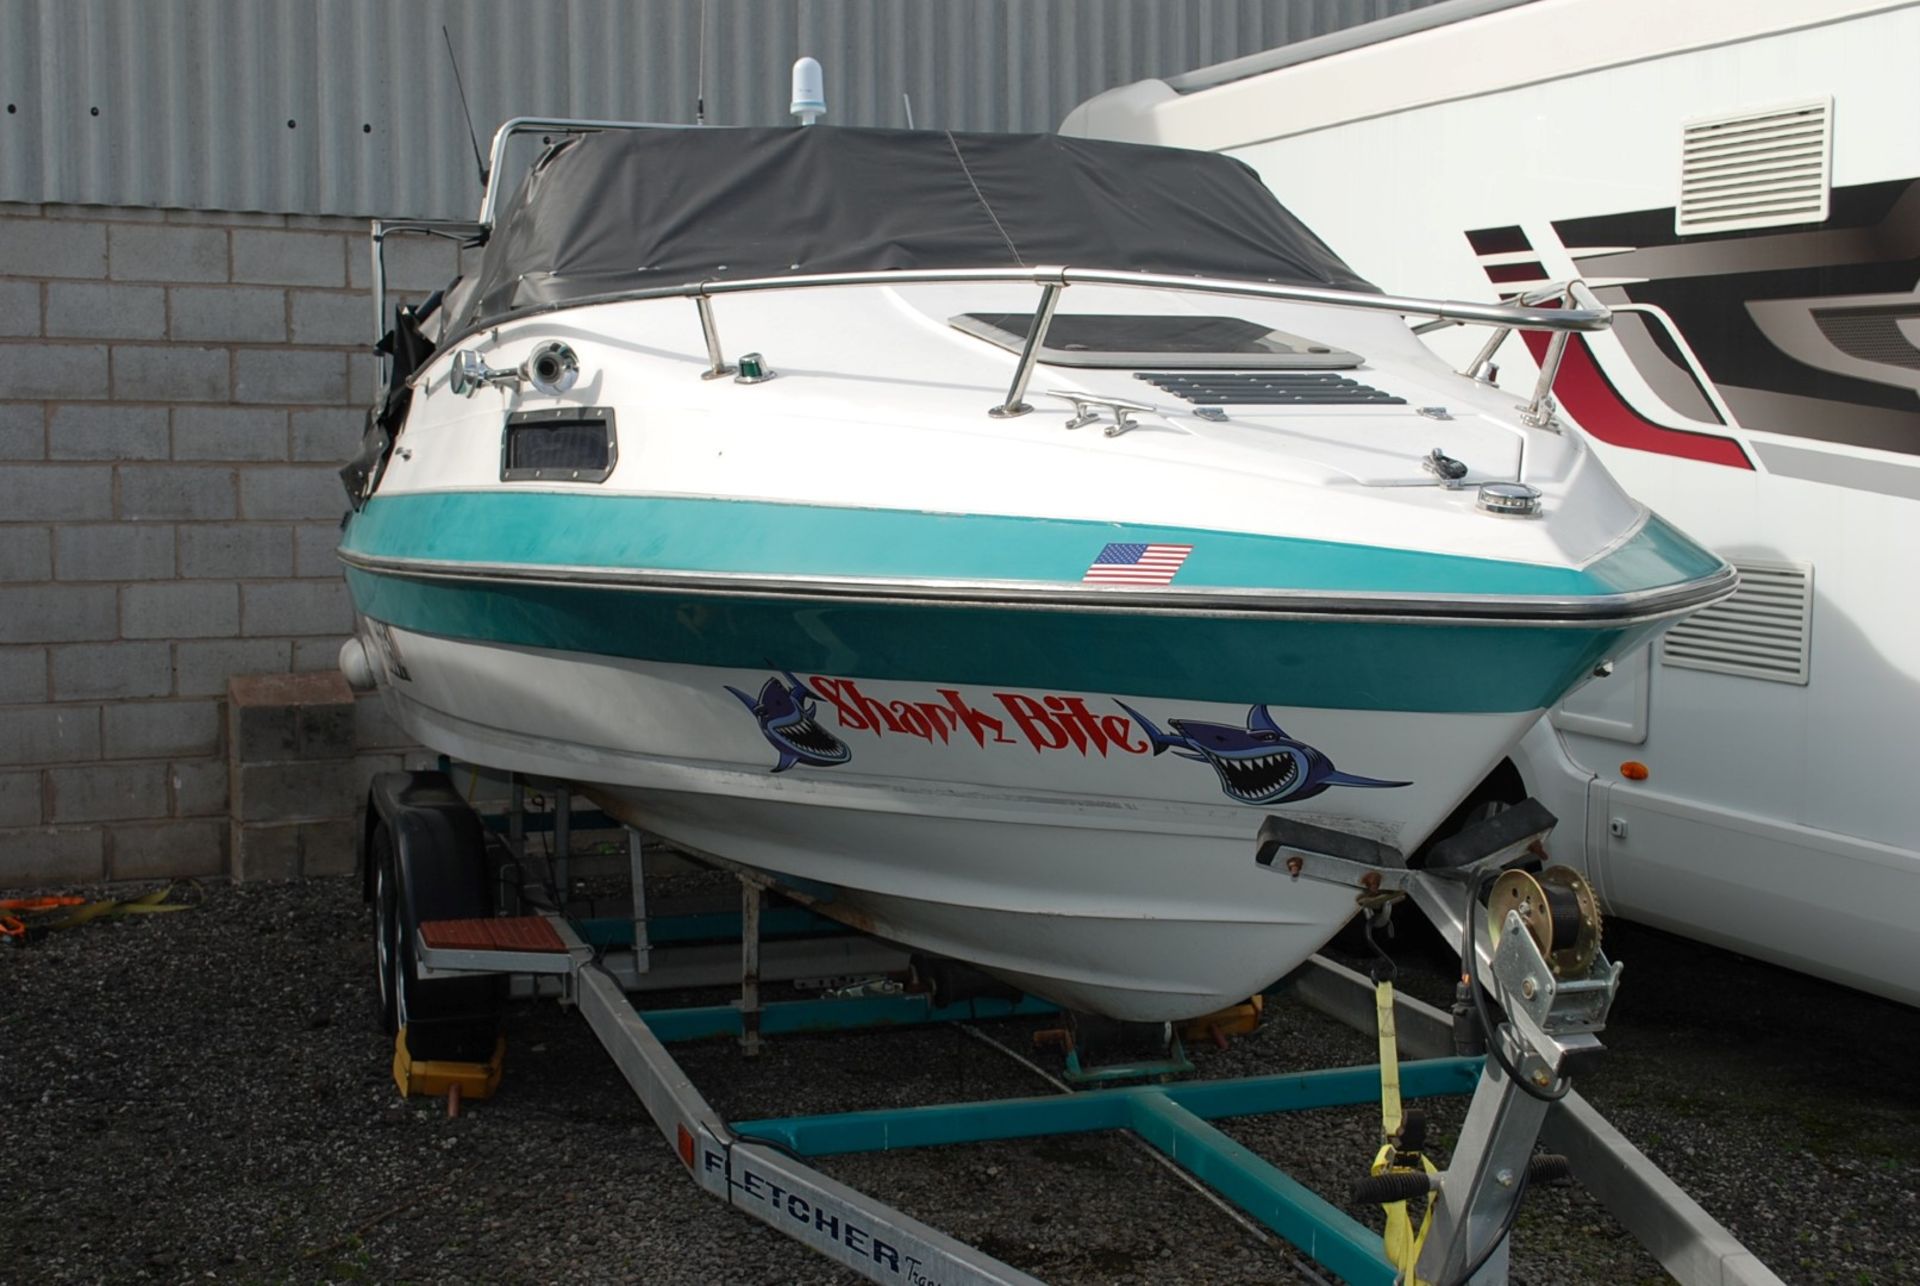 1 x "Sealiner 2002" 20ft Cuddy Outboard Engine Boat - Refitted Inside & Out - Includes Trailer - - Image 2 of 38